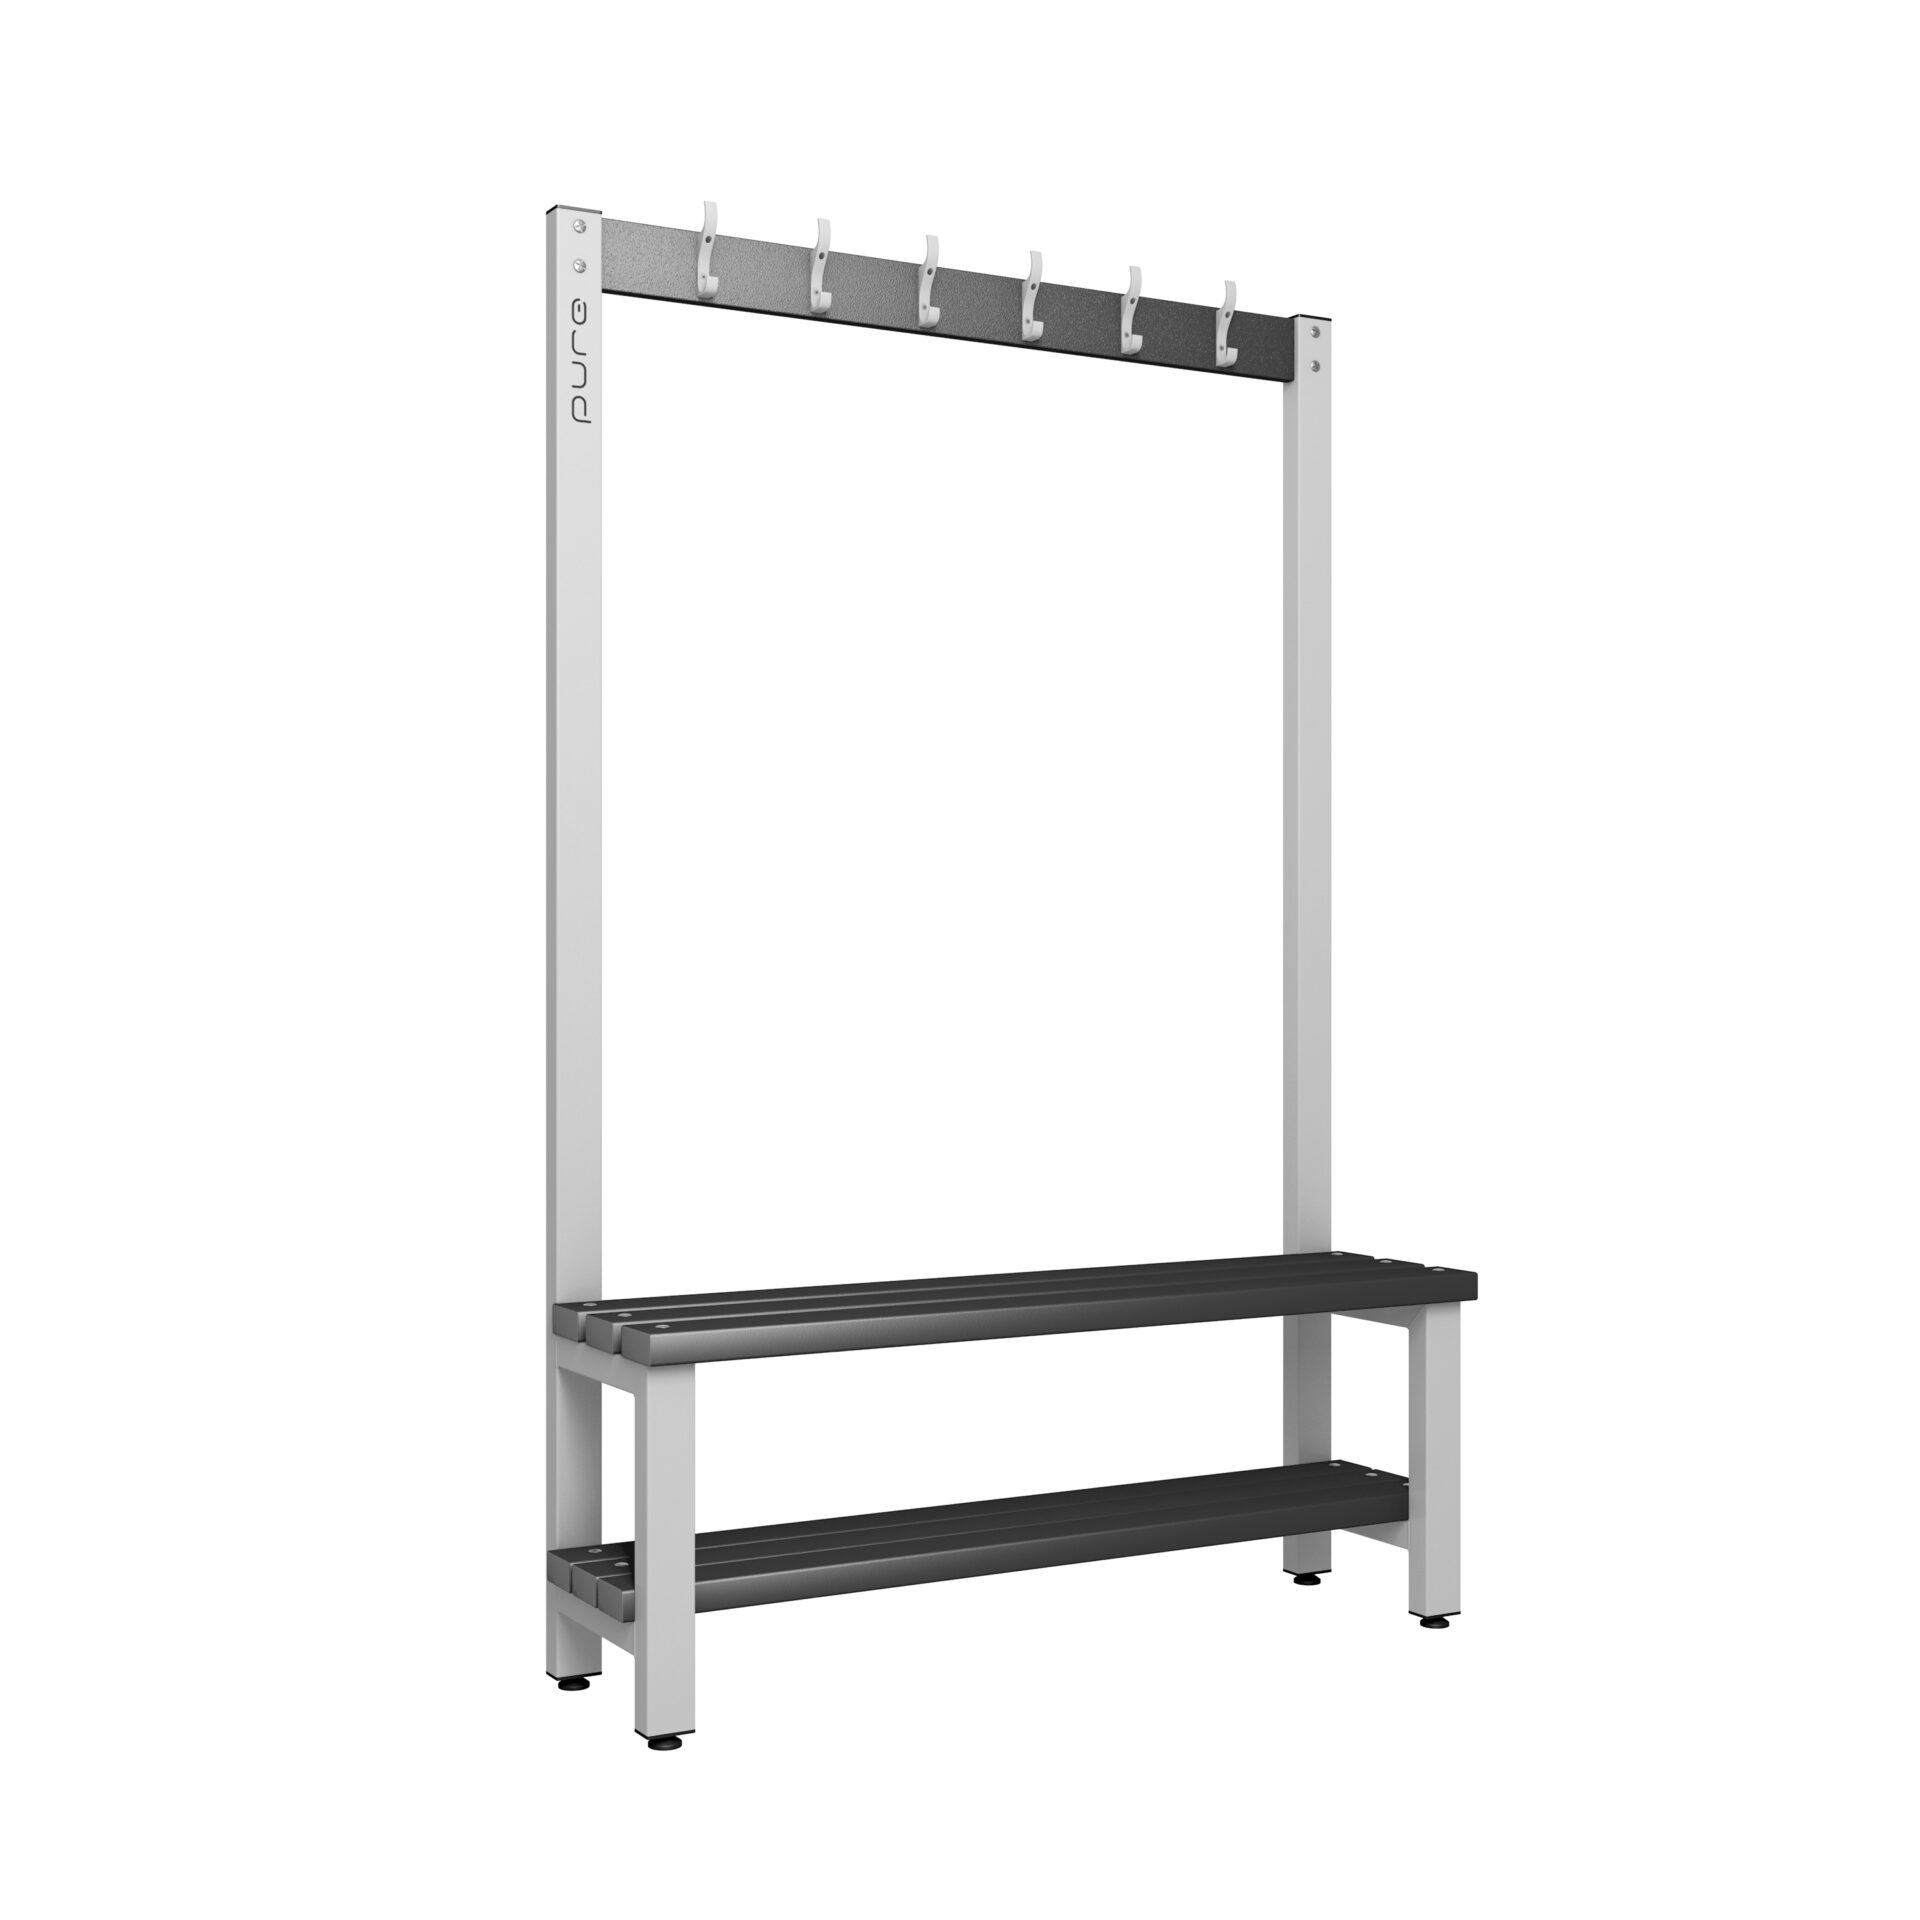 Pure Carbon Zero Single Sided 1200mm 6 Hook Bench With Shoe Shelf - Pearl Silver / Black Polymer